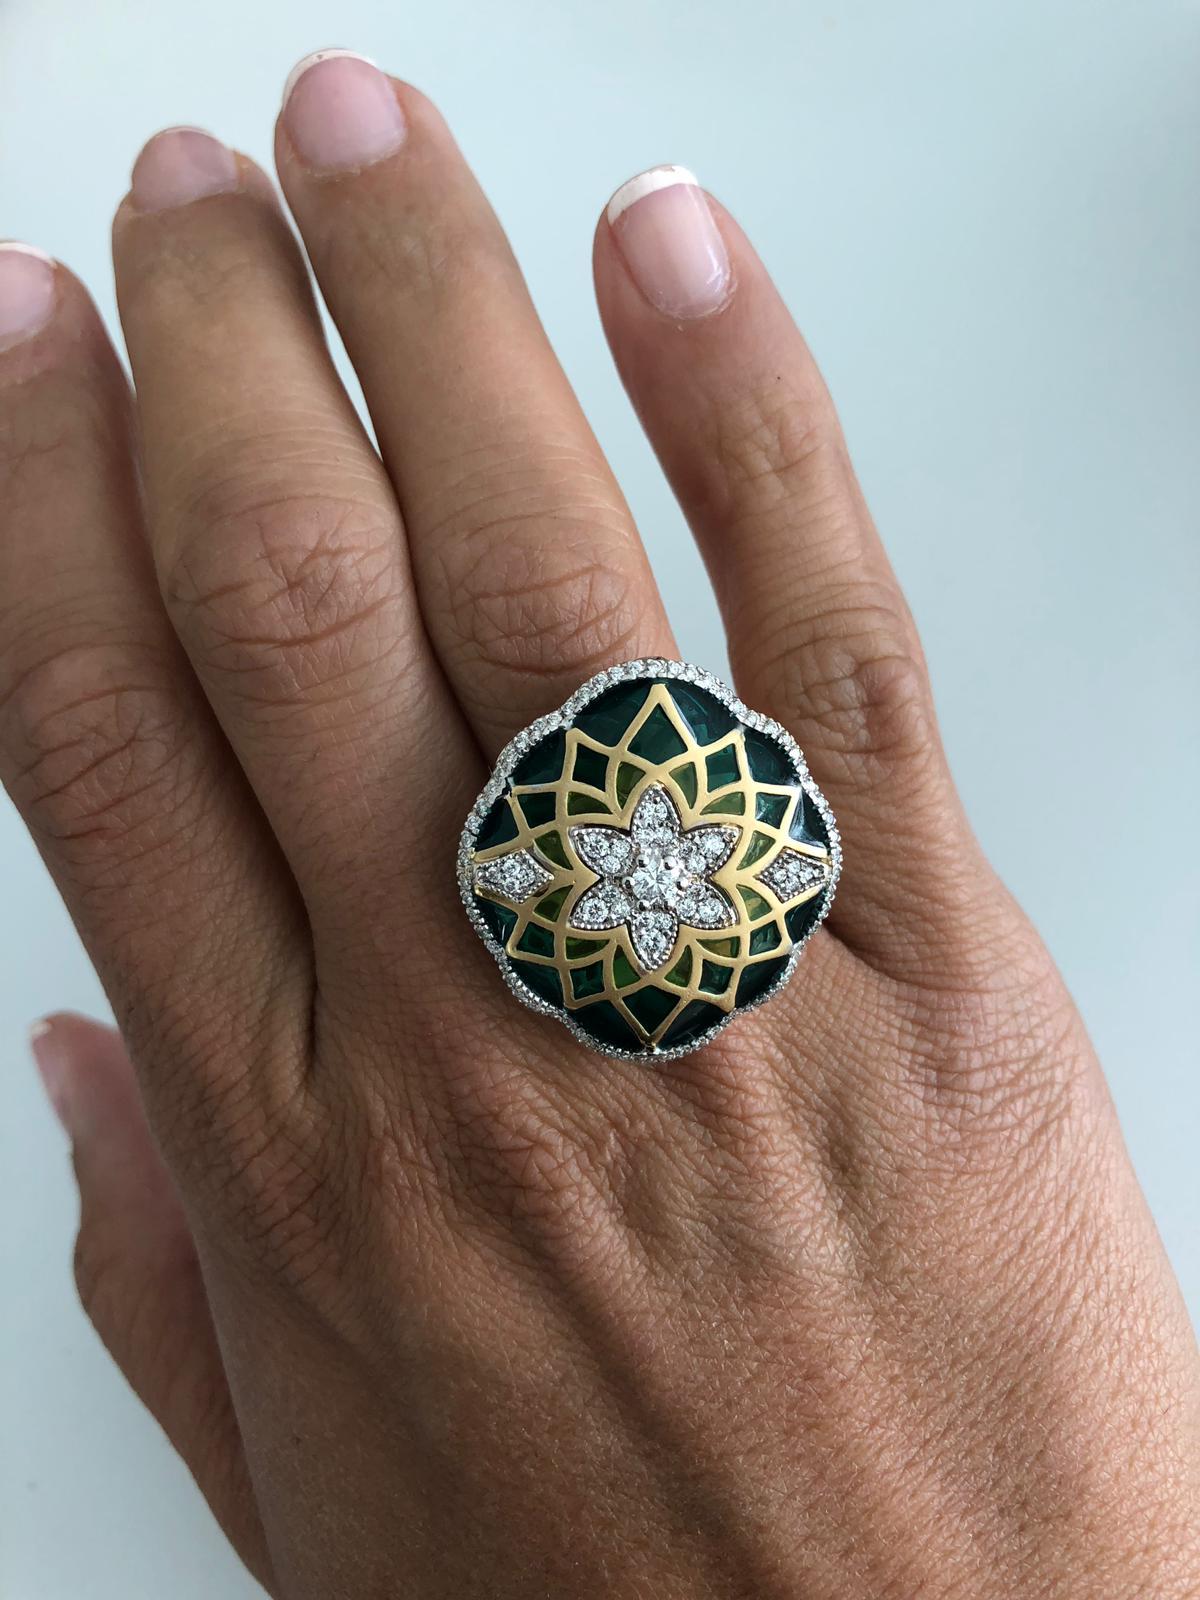 Italian 18K white and yellow gold floral ring featuring a diamond cluster and diamond outline weighing 0.73 Carats with shades of light to dark green enamel. Color F-G Clarity SI
A real eye catcher.
Ring is sizeable 